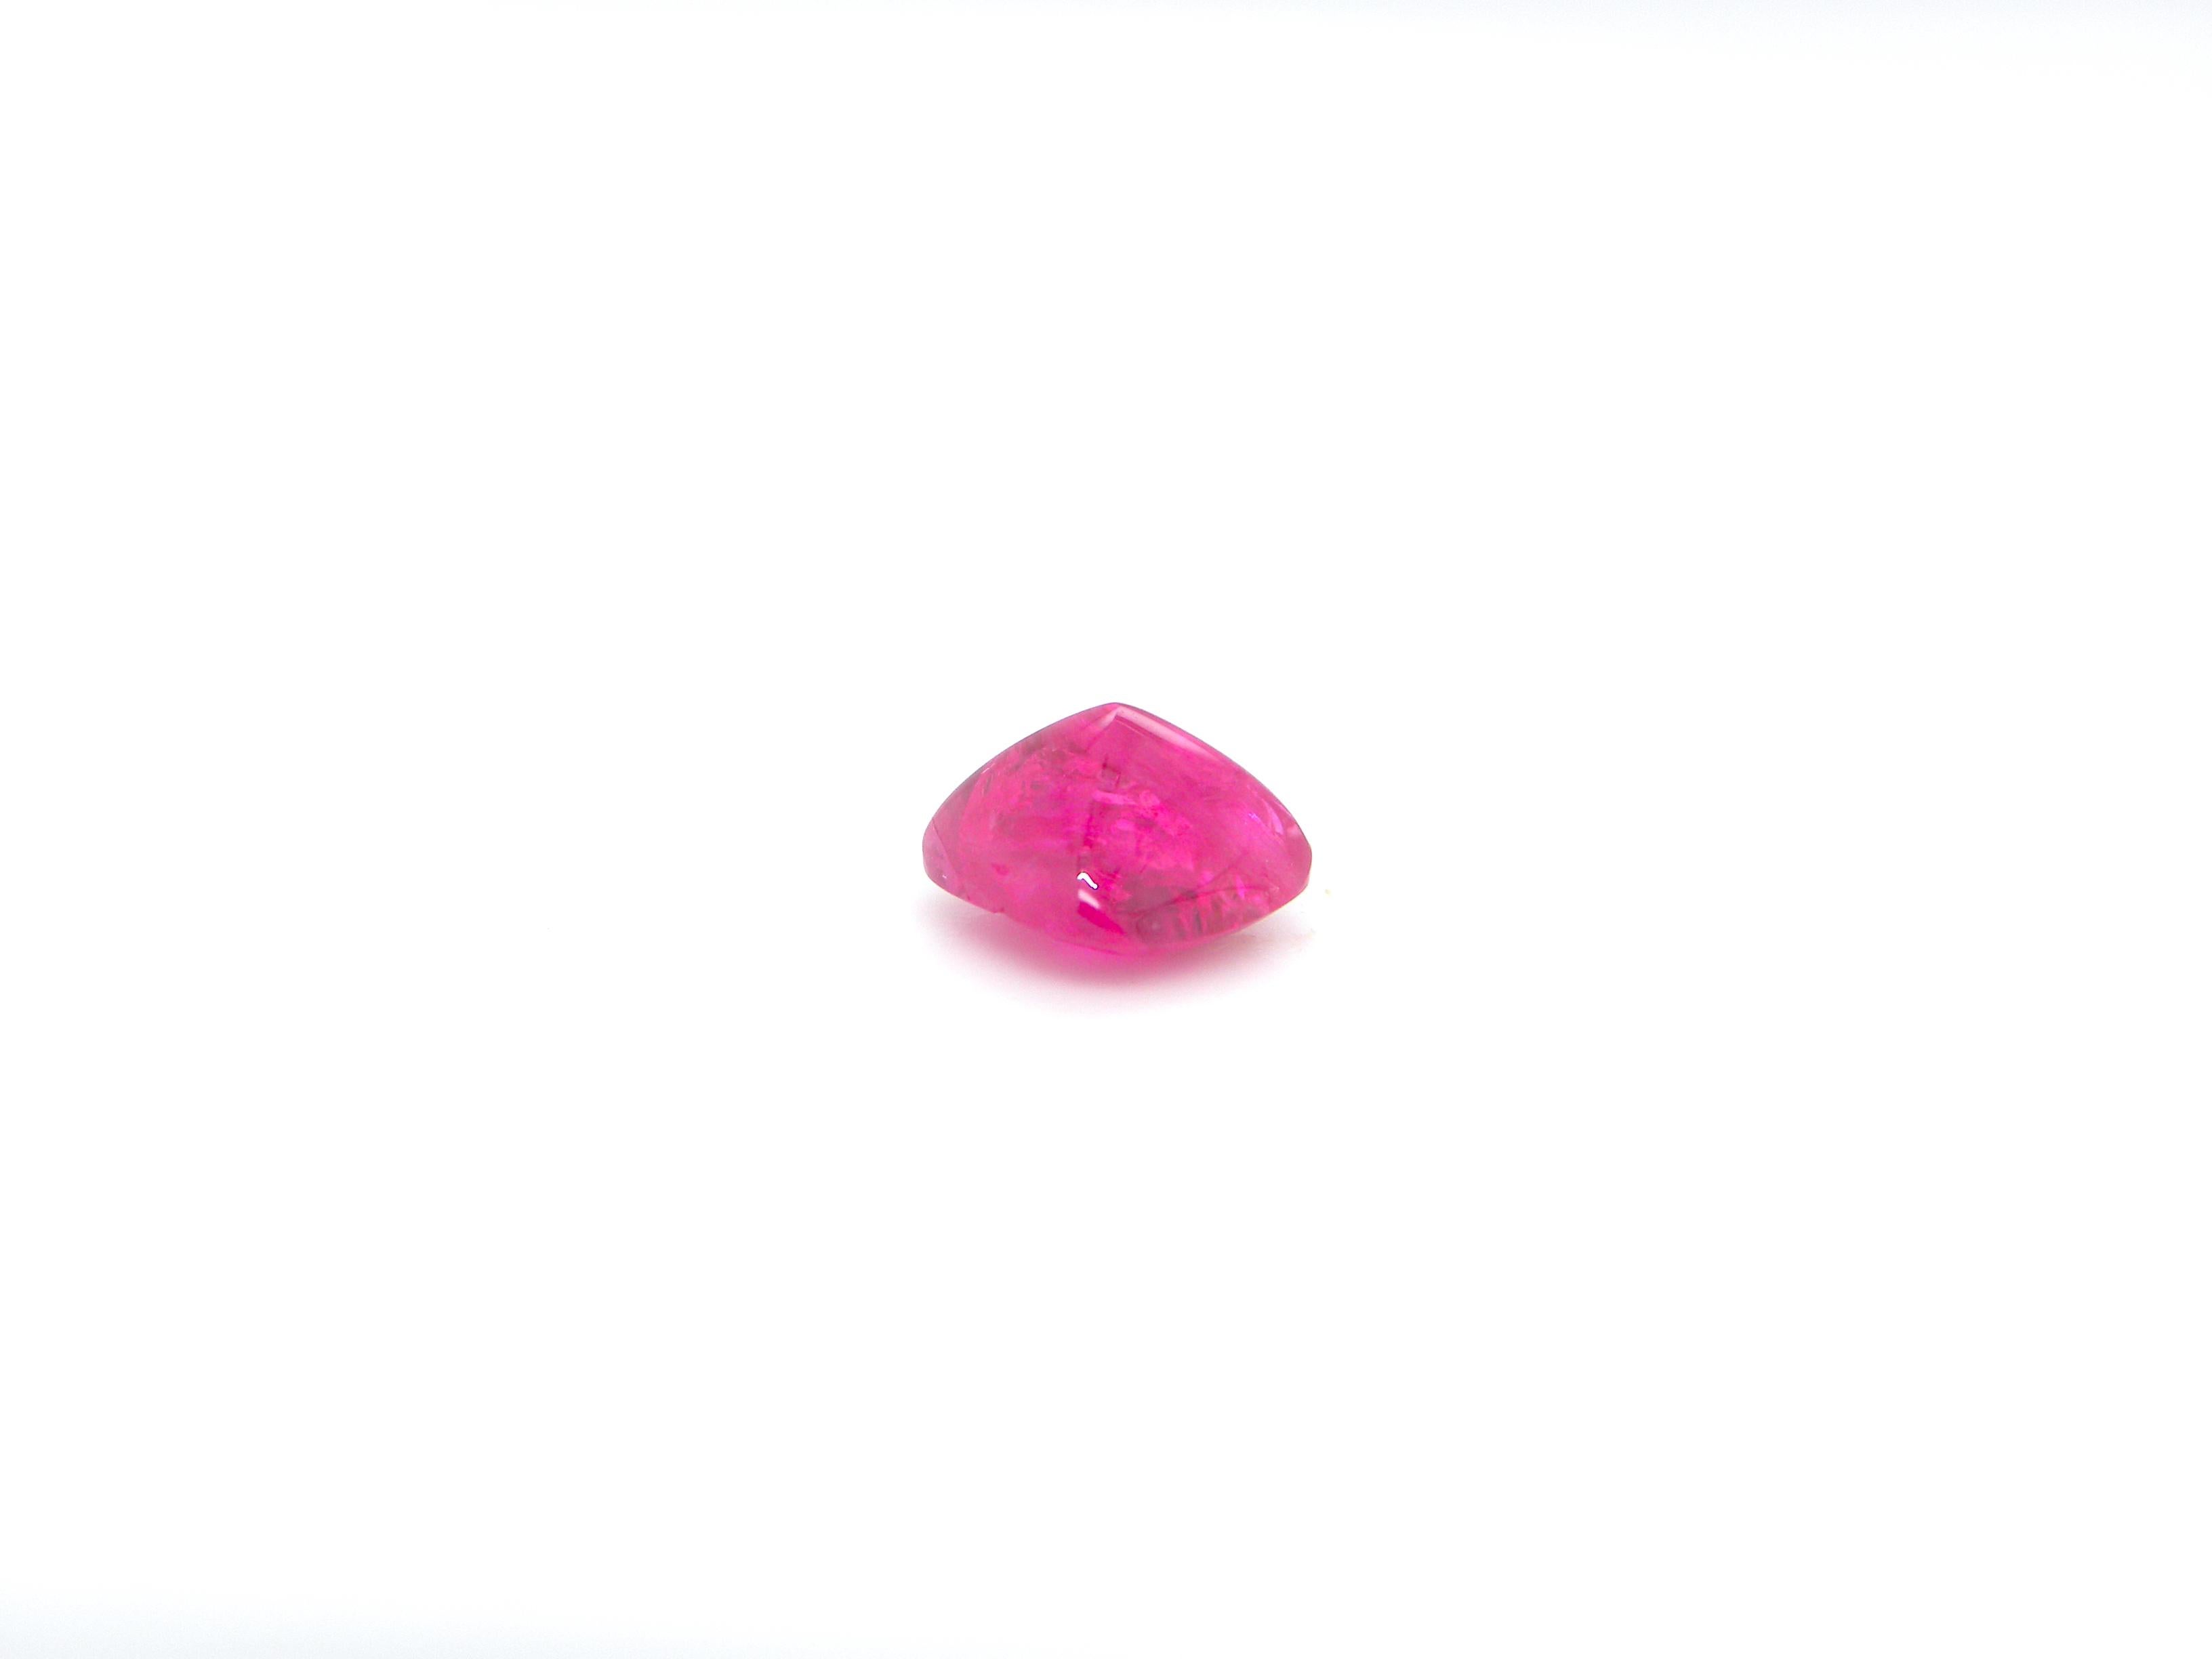 2 Carat Burma No Heat Natural Ruby Sugarloaf:

A gorgeous gem, it is a 2 carat unheated Burmese ruby sugarloaf. Hailing from the historic Mogok mines in Burma, the ruby possesses an intense pinkish red colour saturation, with great lustre and